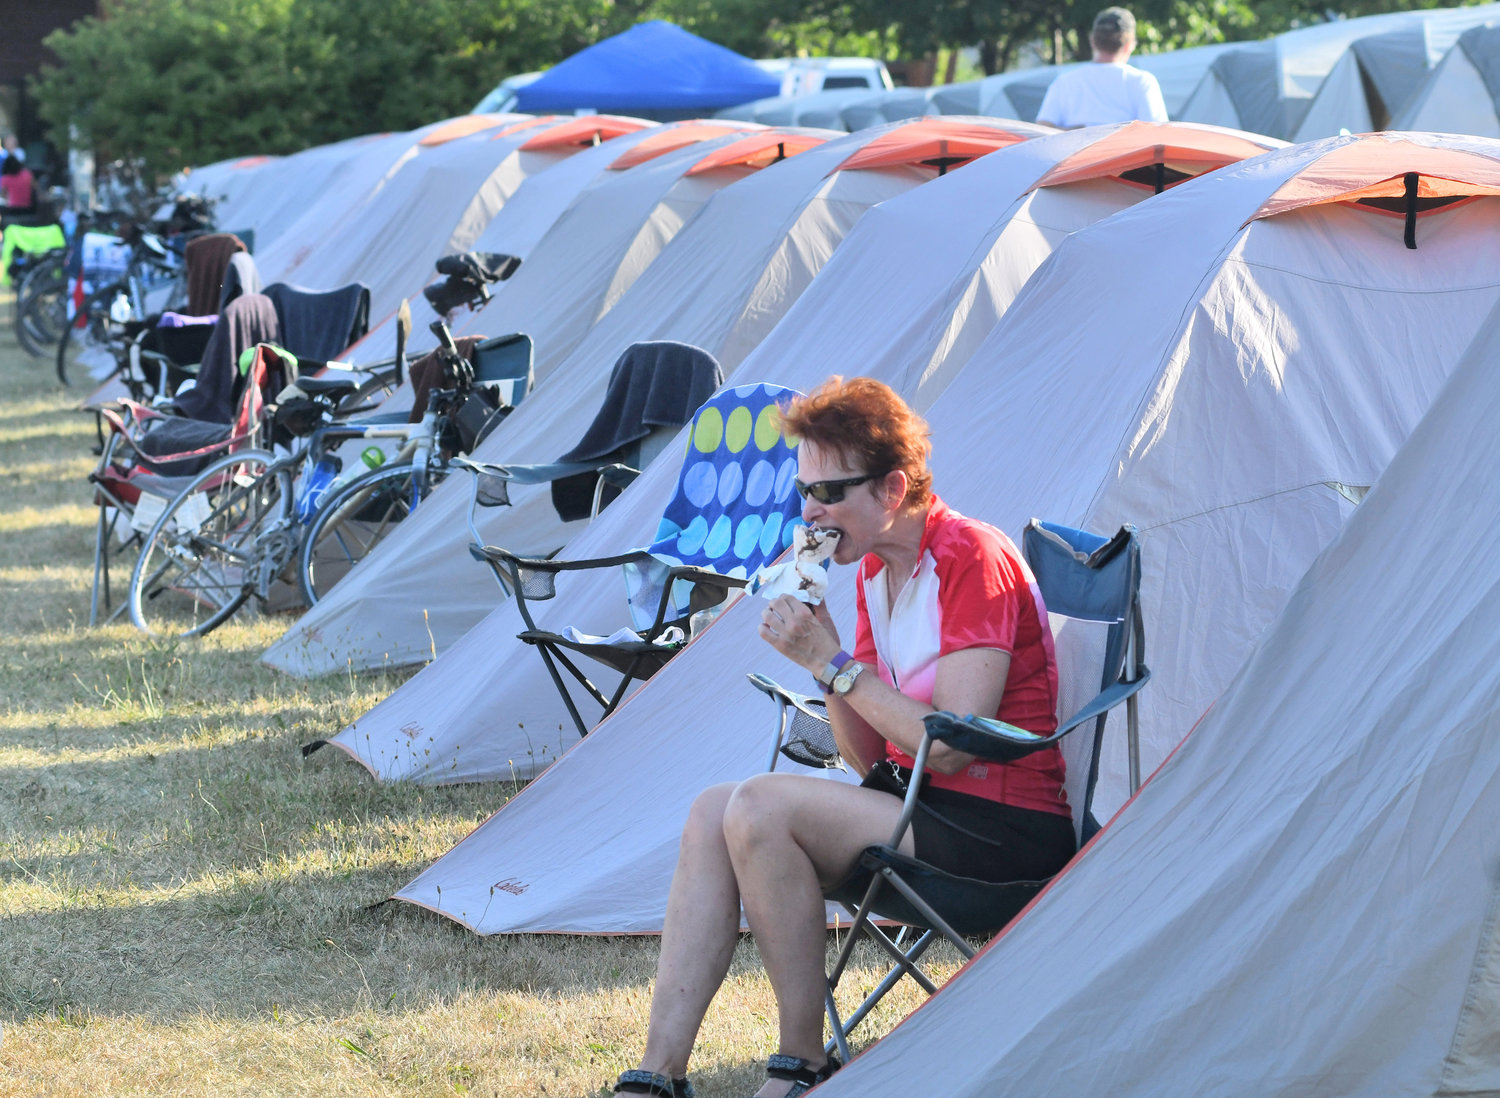 ROLLING THROUGH — A cyclist enjoys an ice cream treat after arriving in Rome for an overnight camp out at Fort Stanwix National Monument in this 2018 file photo. Event organizers and local officials, including the Rome Area Chamber of Commerce, are working toward a return of the popular event to the community.